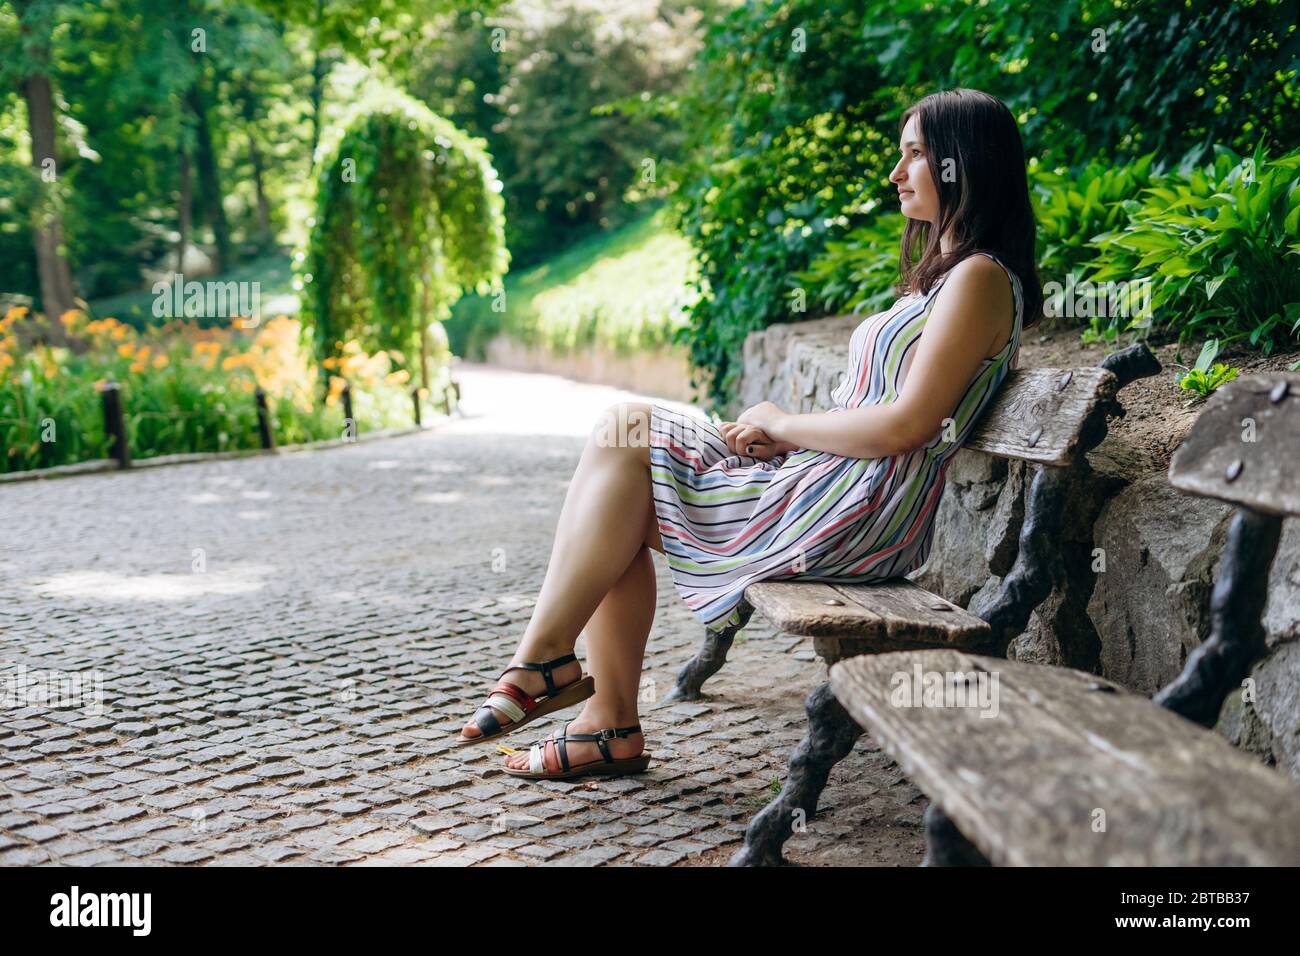 Sofia Park, Uman. Girl tourist in a summer white dress in a beautiful green  park. Girl sitting on a wooden bench in a landscaped park. Smiling girl re  Stock Photo - Alamy